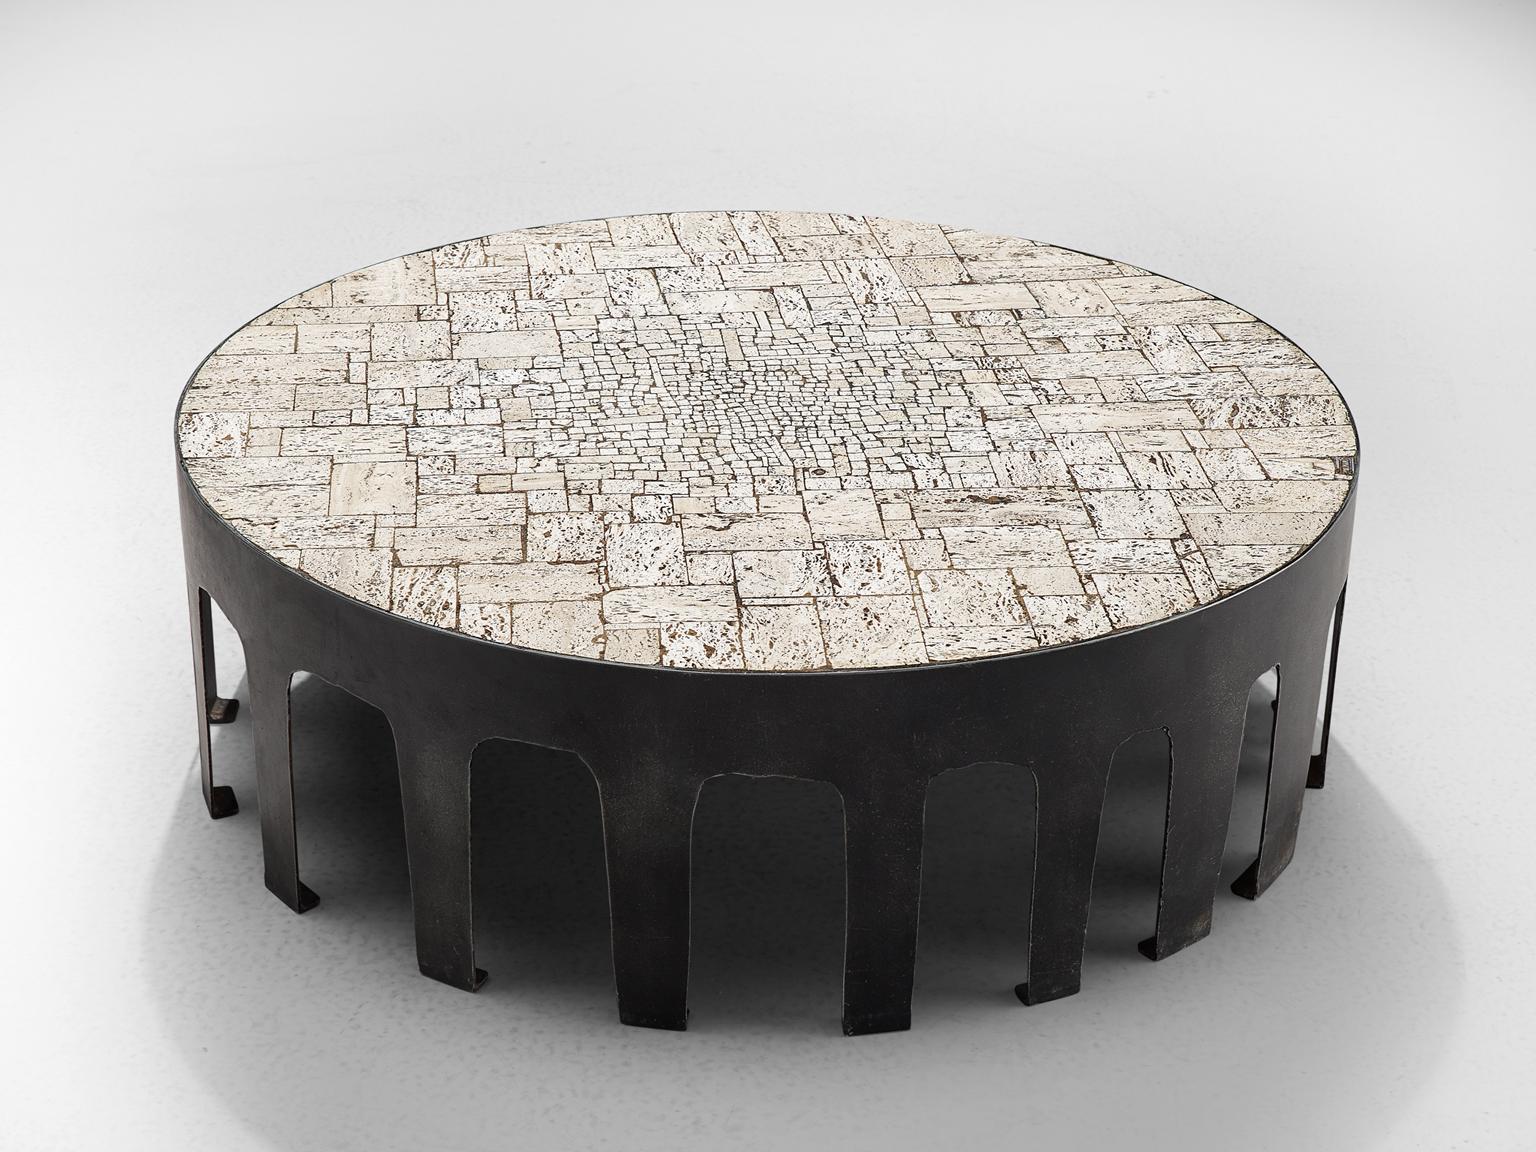 Pia Manu, steel and travertine coffee table, Belgium, 1960.

This unique, hand made piece with cut metal frame designed in the workshop of Pia Manu. The frame was made with several legs and subsequently inlayed with travertine. The combination of